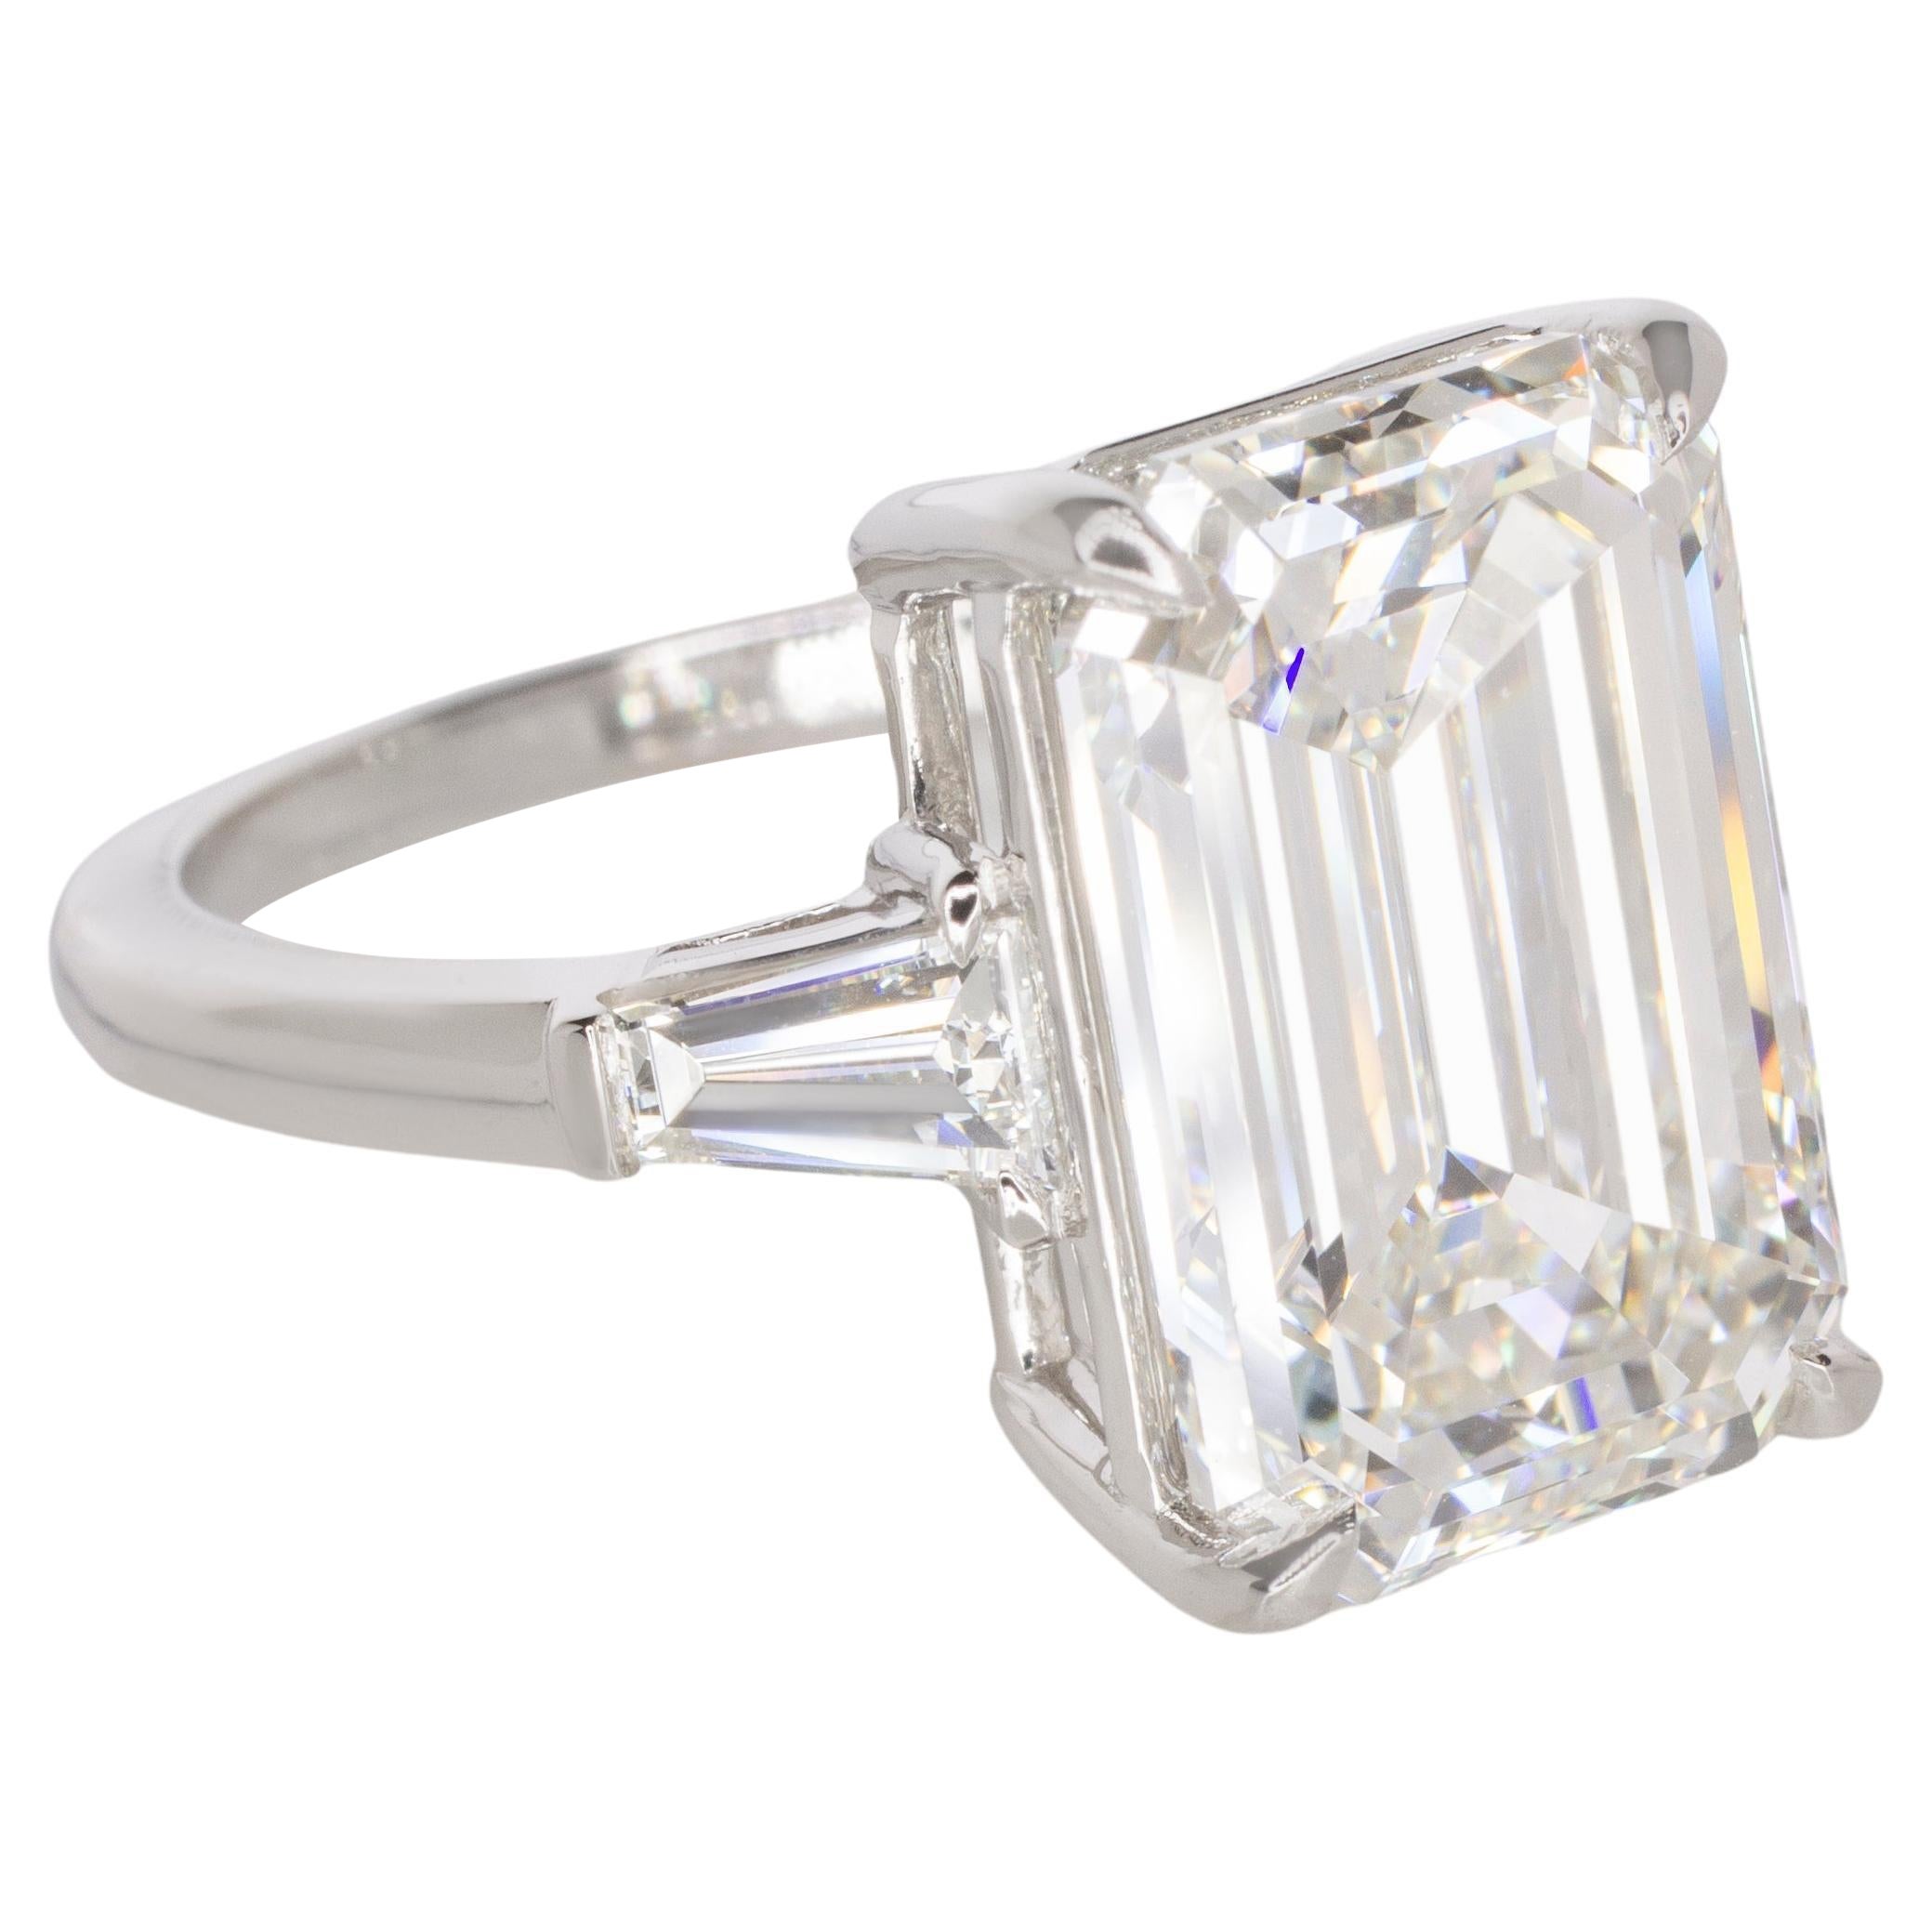 GIA Certified 4.05 Carat Emerald Cut Diamond Platinum Ring with tapered baguette